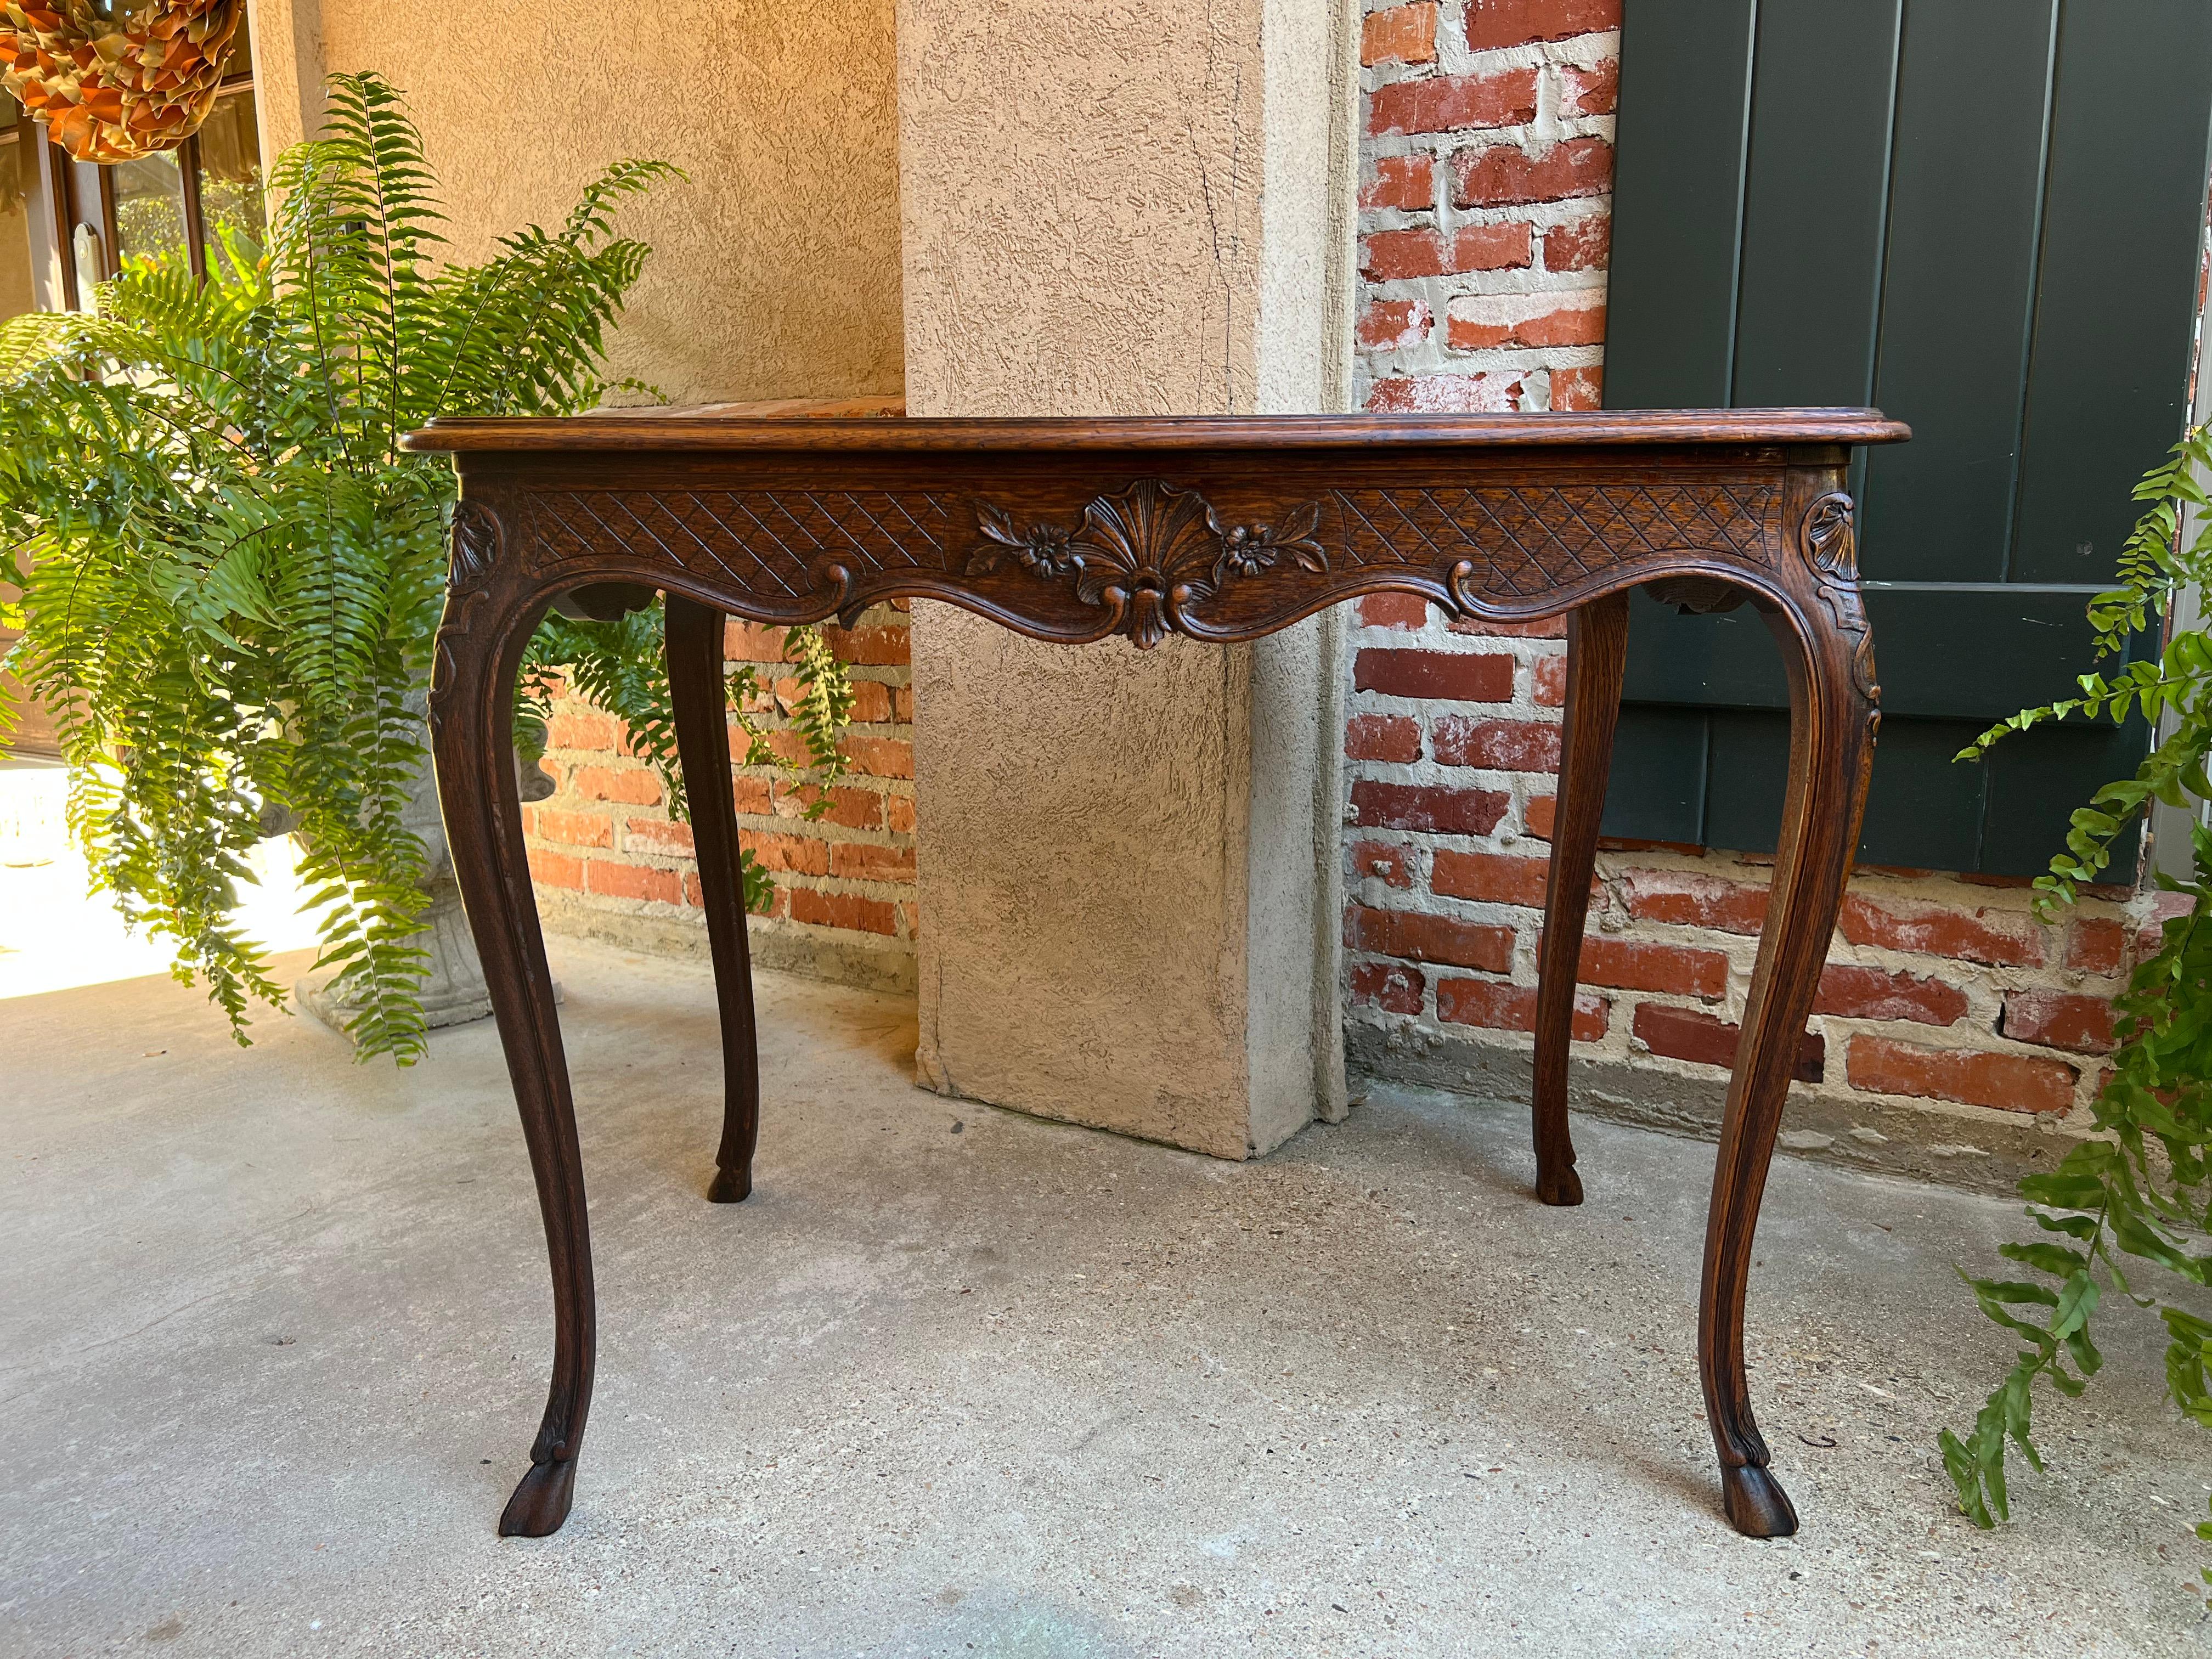 ~Direct from France~
A lovely carved French side or sofa table with classic French Louis XV style and elegance. 
Beveled serpentine edge oak table top above the contoured apron. Apron is richly carved with shell and foliate motifs amidst carved